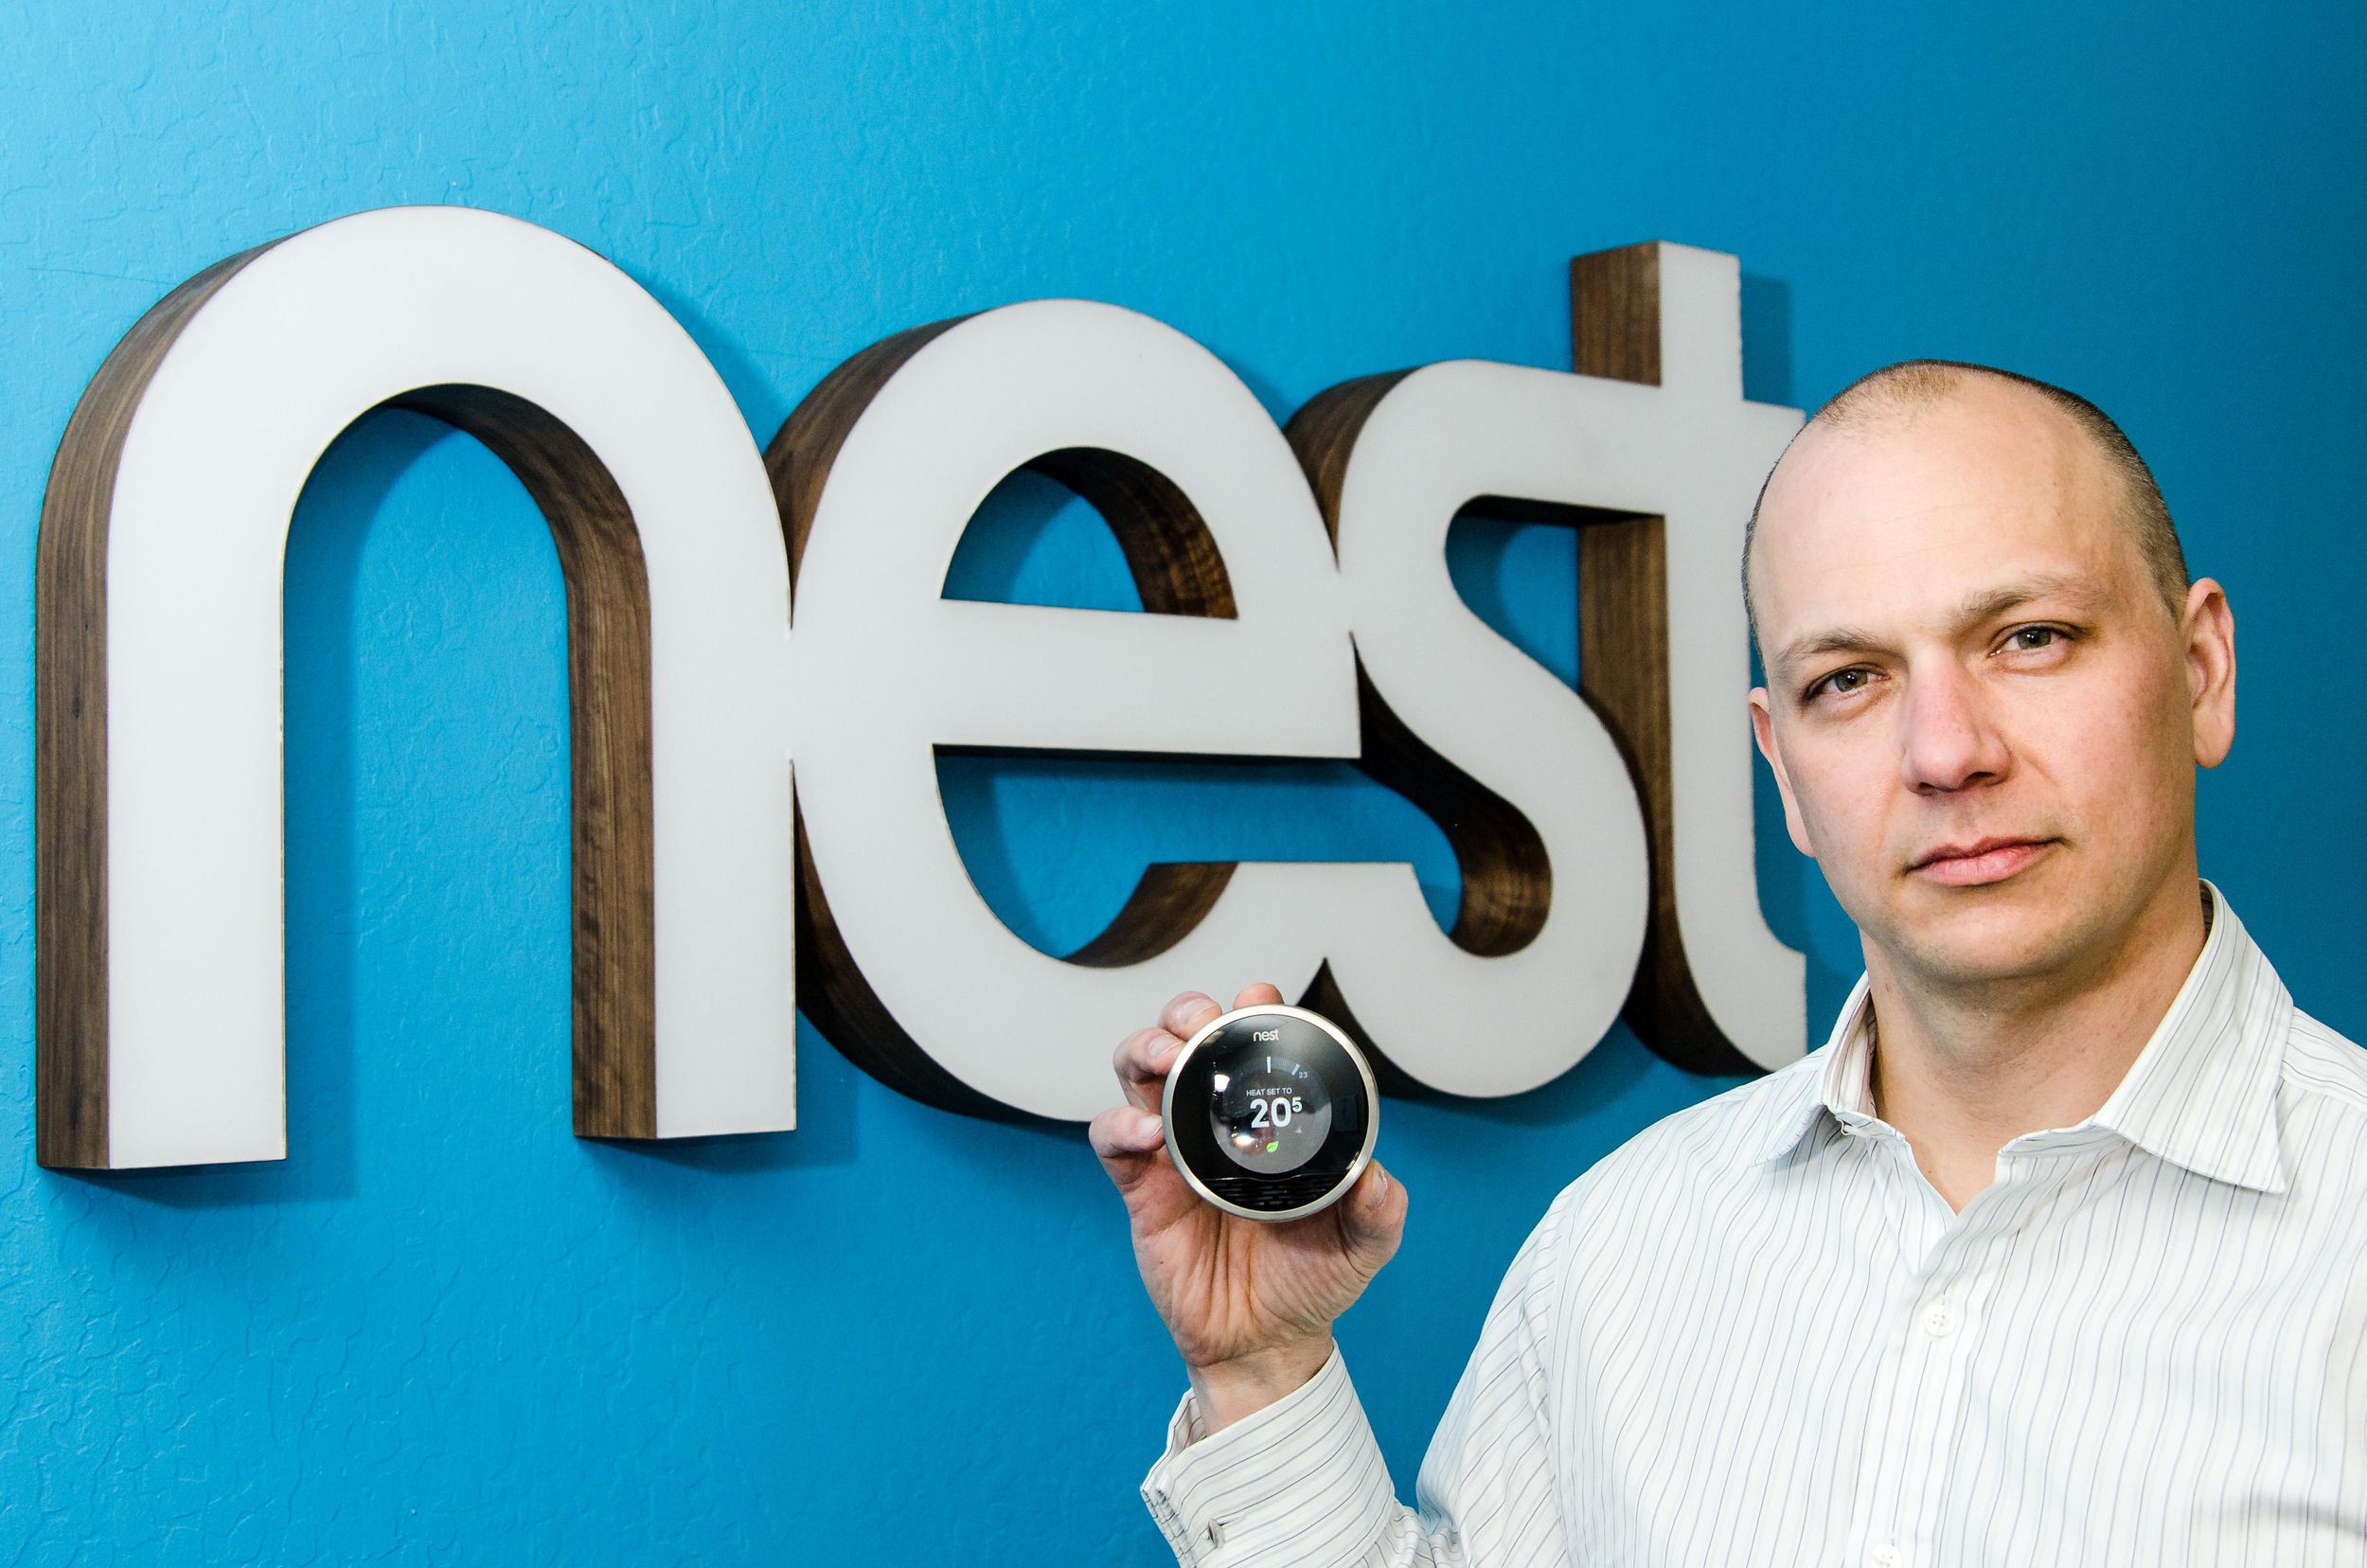 A man holds a circular device in front of a blue wall that says nest on it.